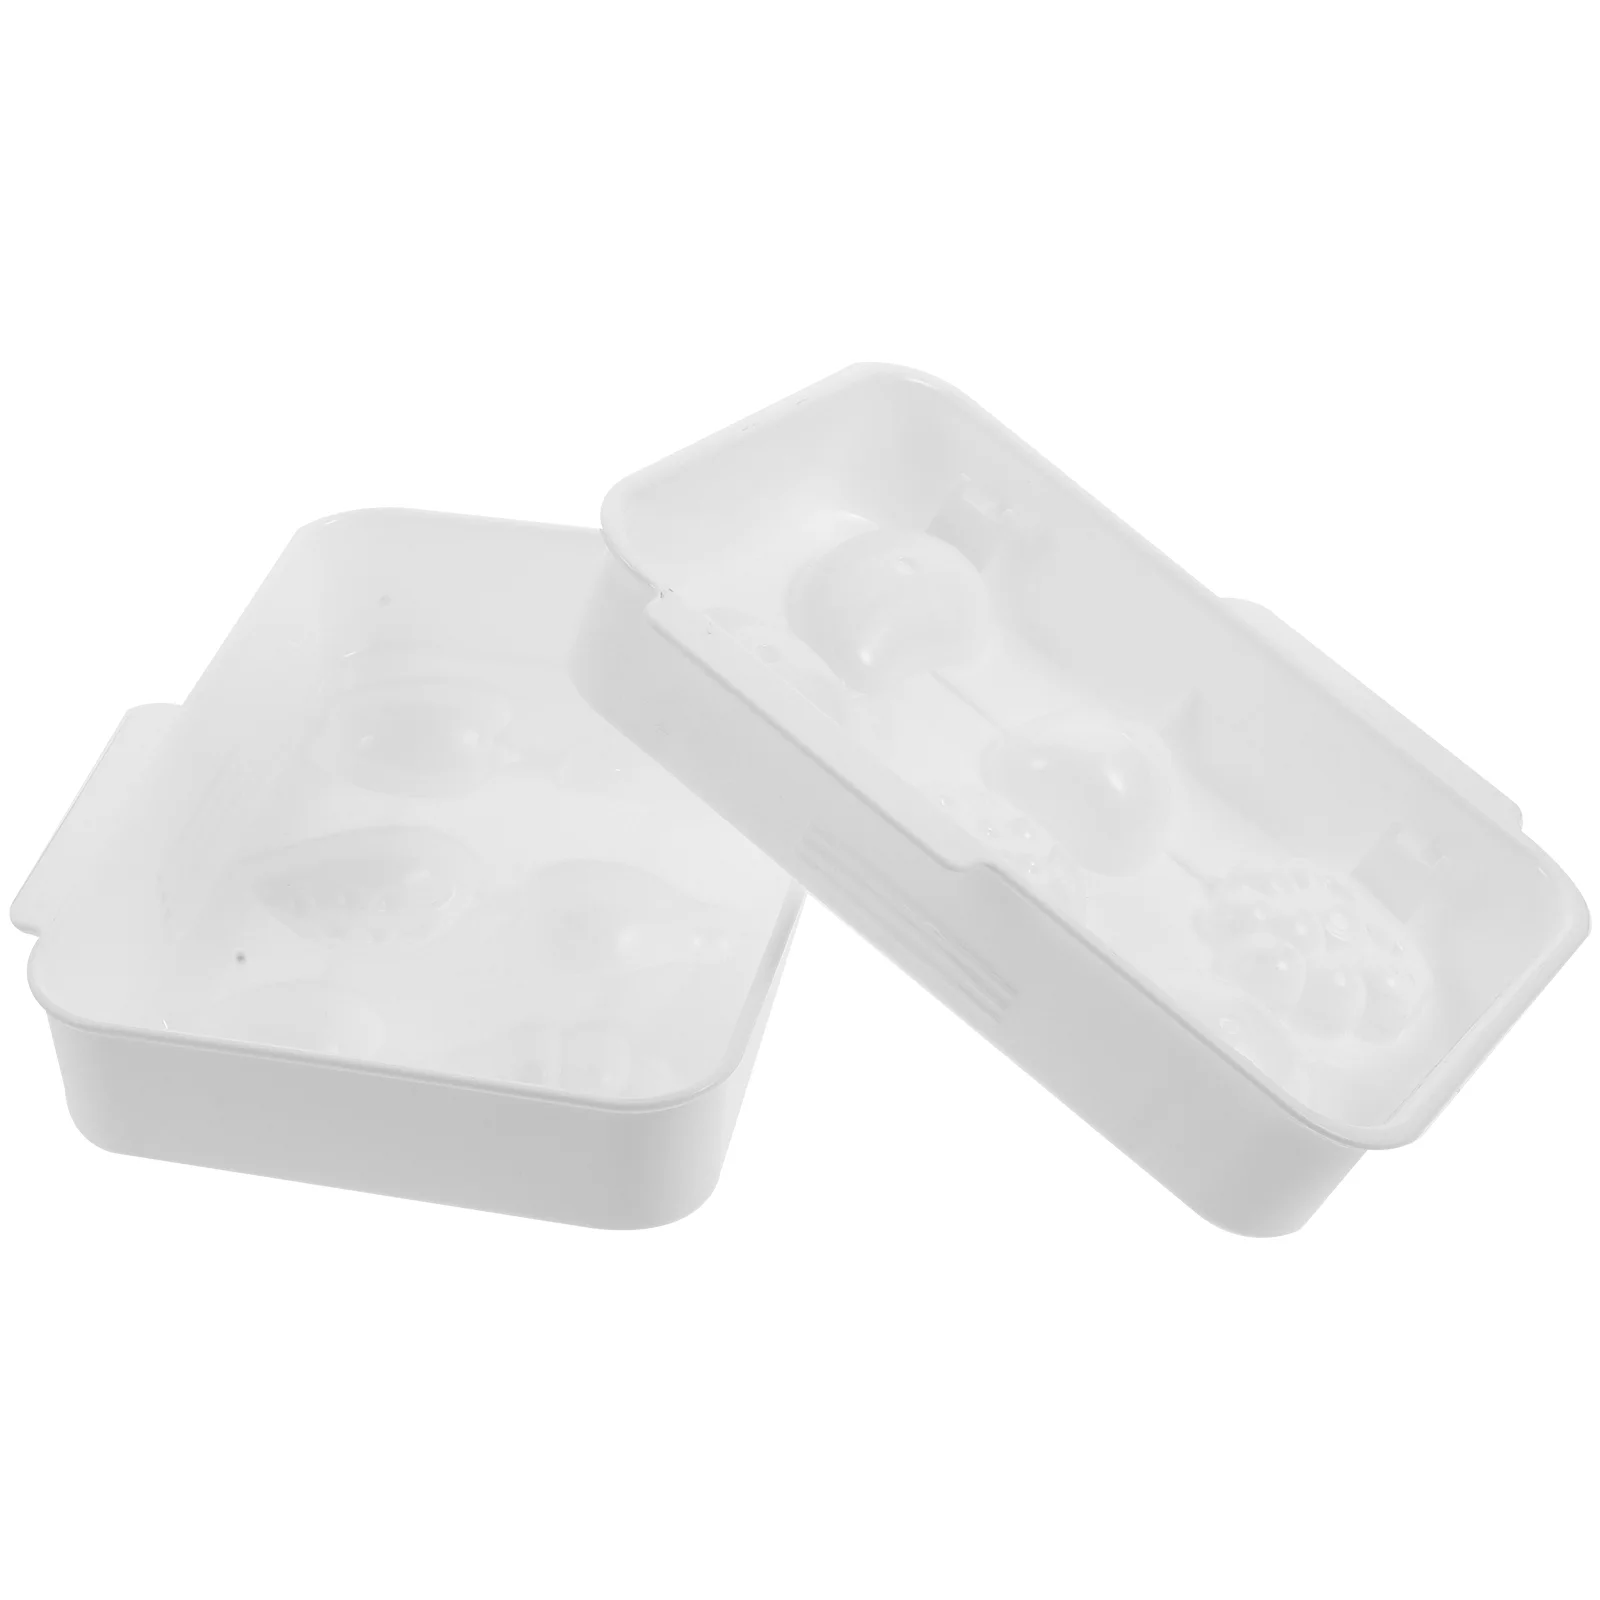 

Ice Cube Trays Tiny Molds Freezer Square Covered Containers Molding Moulds Block Maker Tray Lid Box Mini Cover Cool